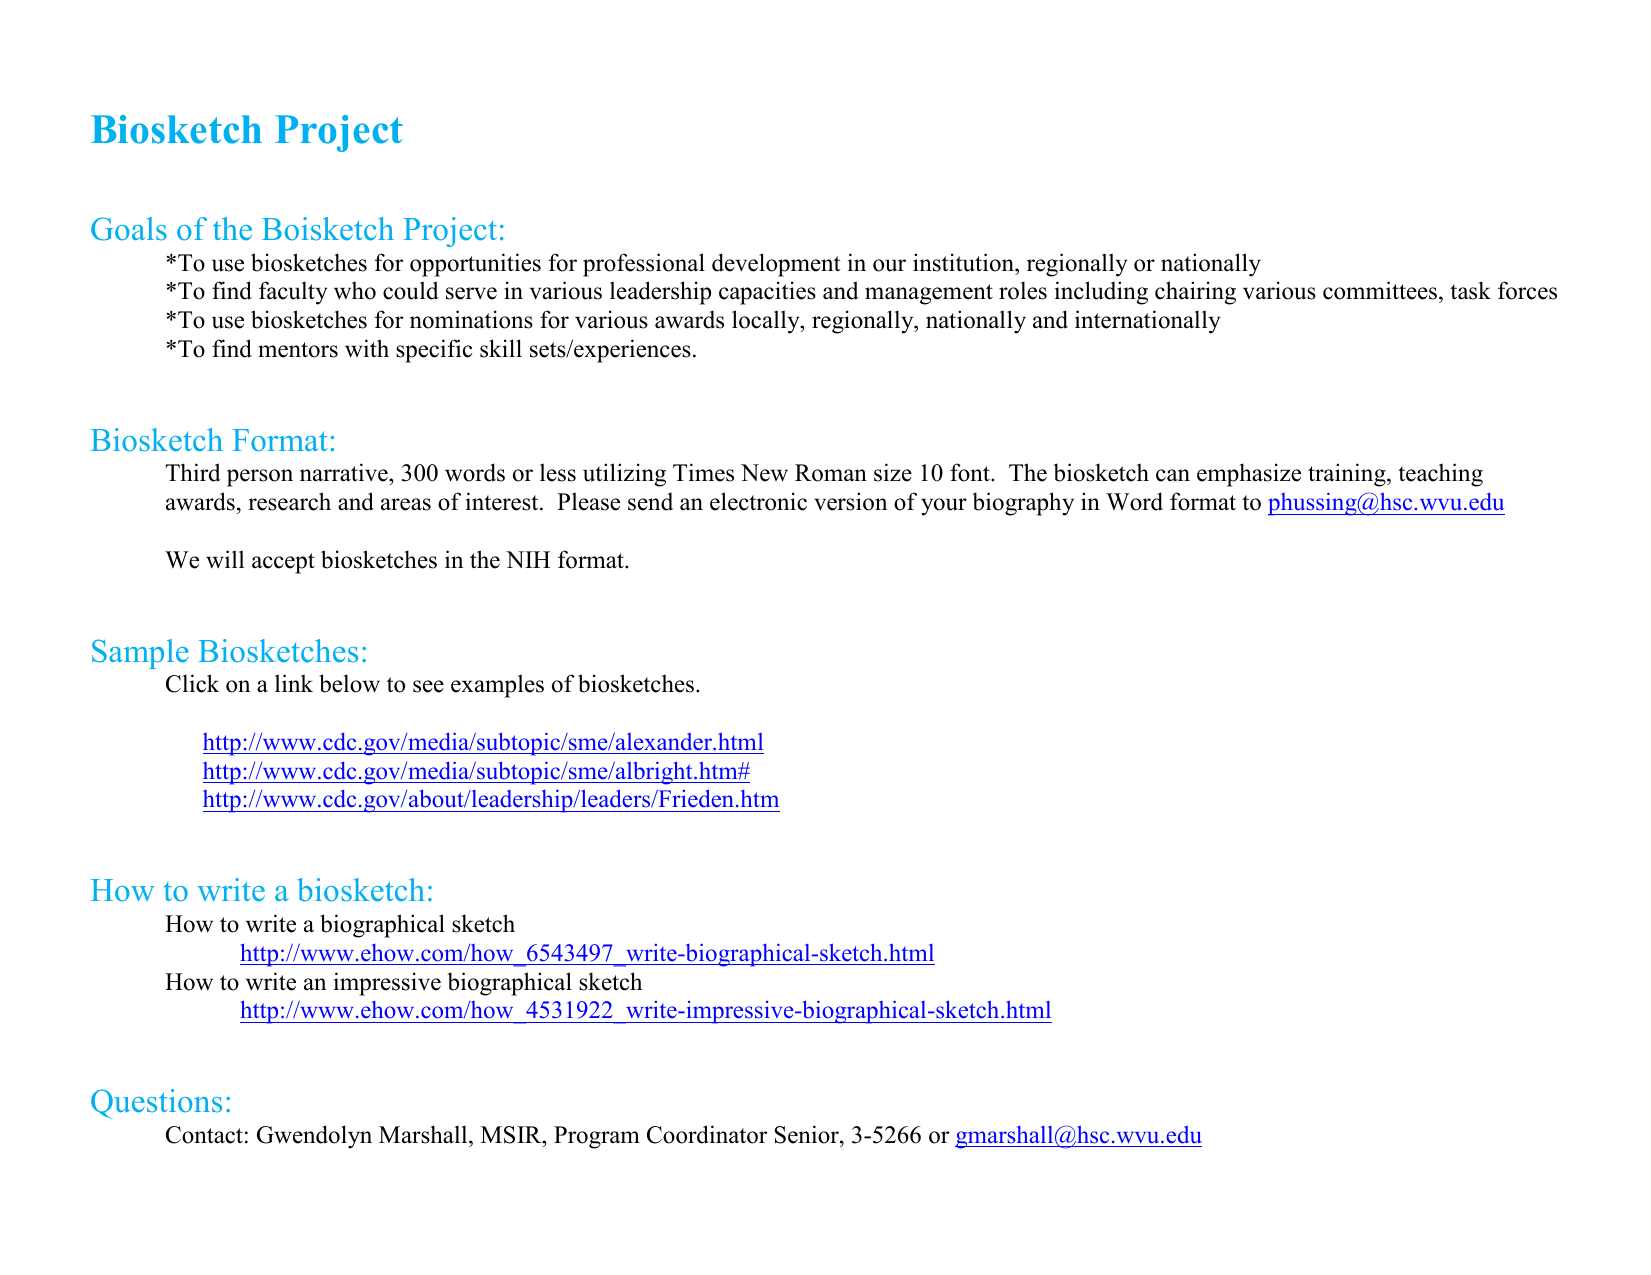 Biosketch Project Goals of the Boisketch Project: